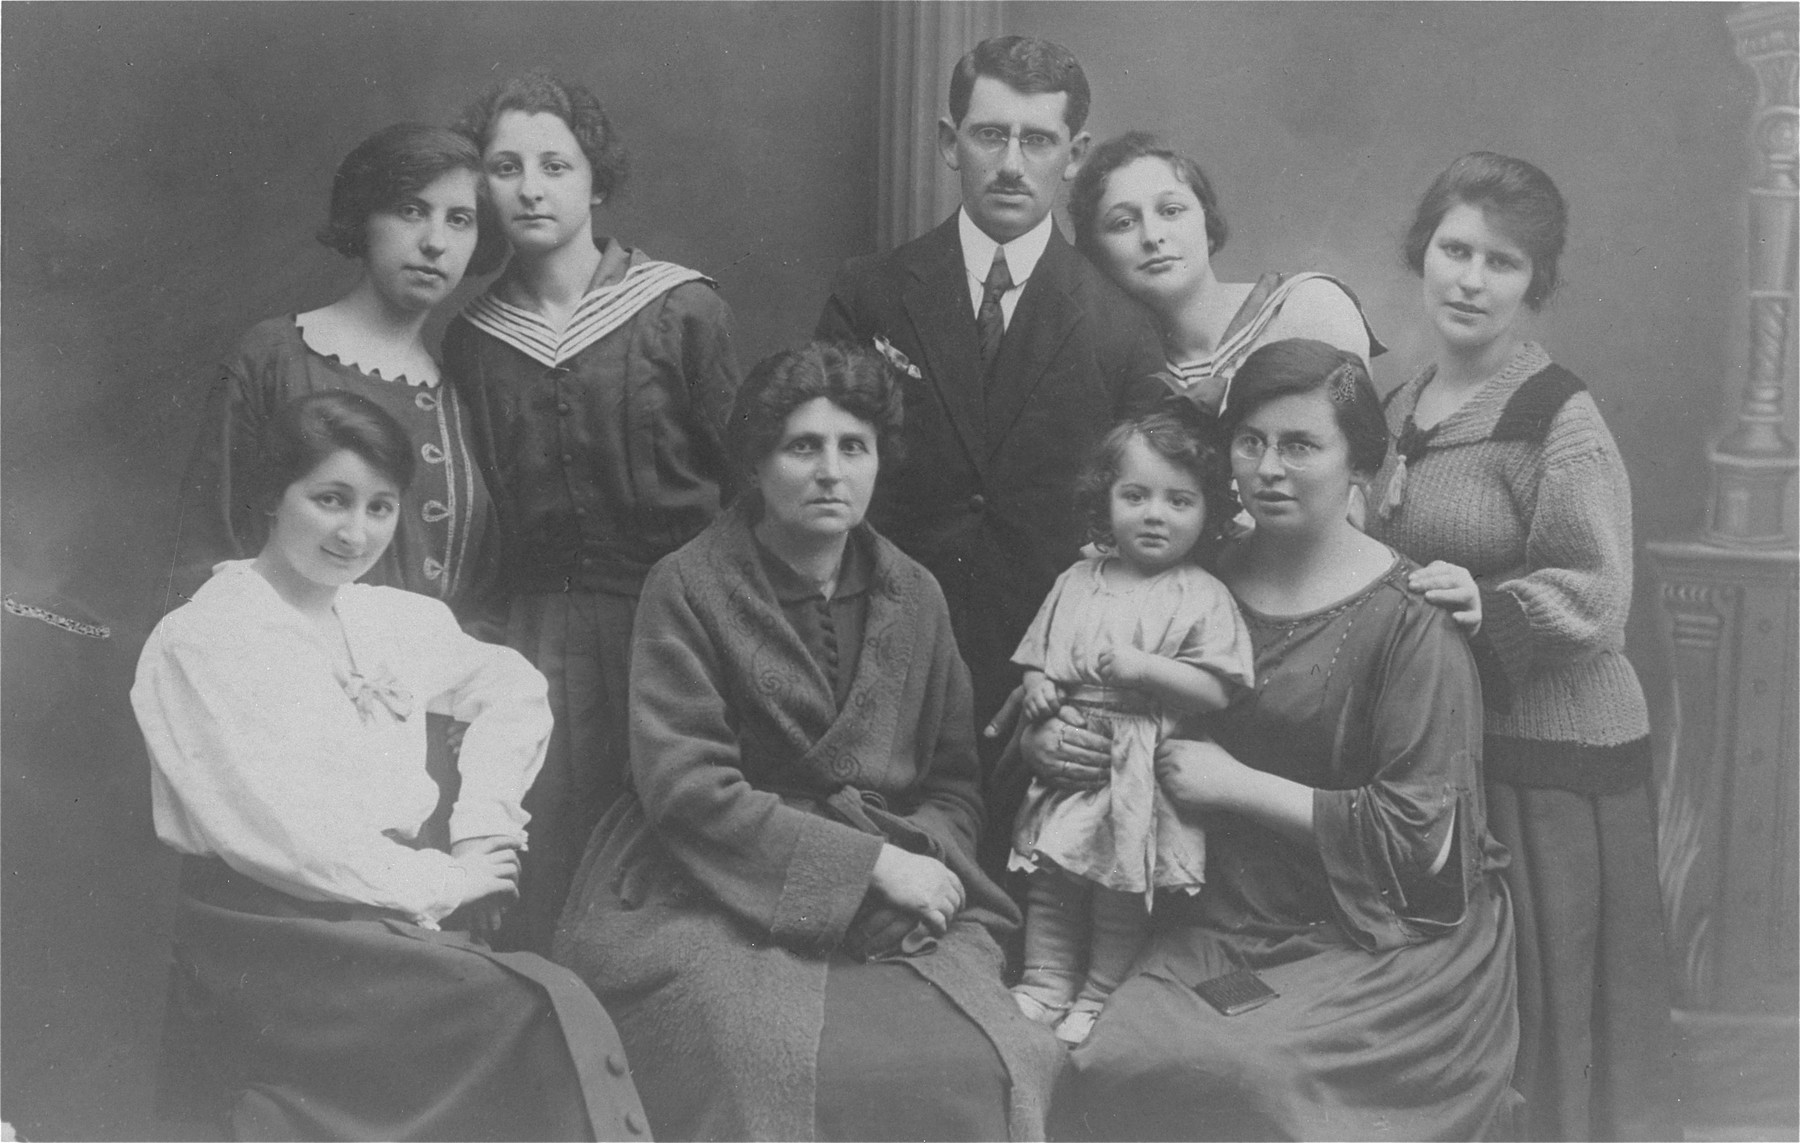 Studio portrait of members of the Laks and Tenenblum families.

Sitting in the front row, from left to right are Anna Tenenblum (Pola's aunt), Sara Tenenblum (Pola's mother), and Pola (Tenenblum) Laks holding her baby Hania Laks.  Standing in the back row from left to right are: Dora Laks (Isaac's sister), Rozia Tenenblum (Pola's sister), Isaac Laks, Regina Tenenblum (Pola's sister) and Lodzia Laks (Isaac's sister).  Only Dora and Hania Laks survived the war.